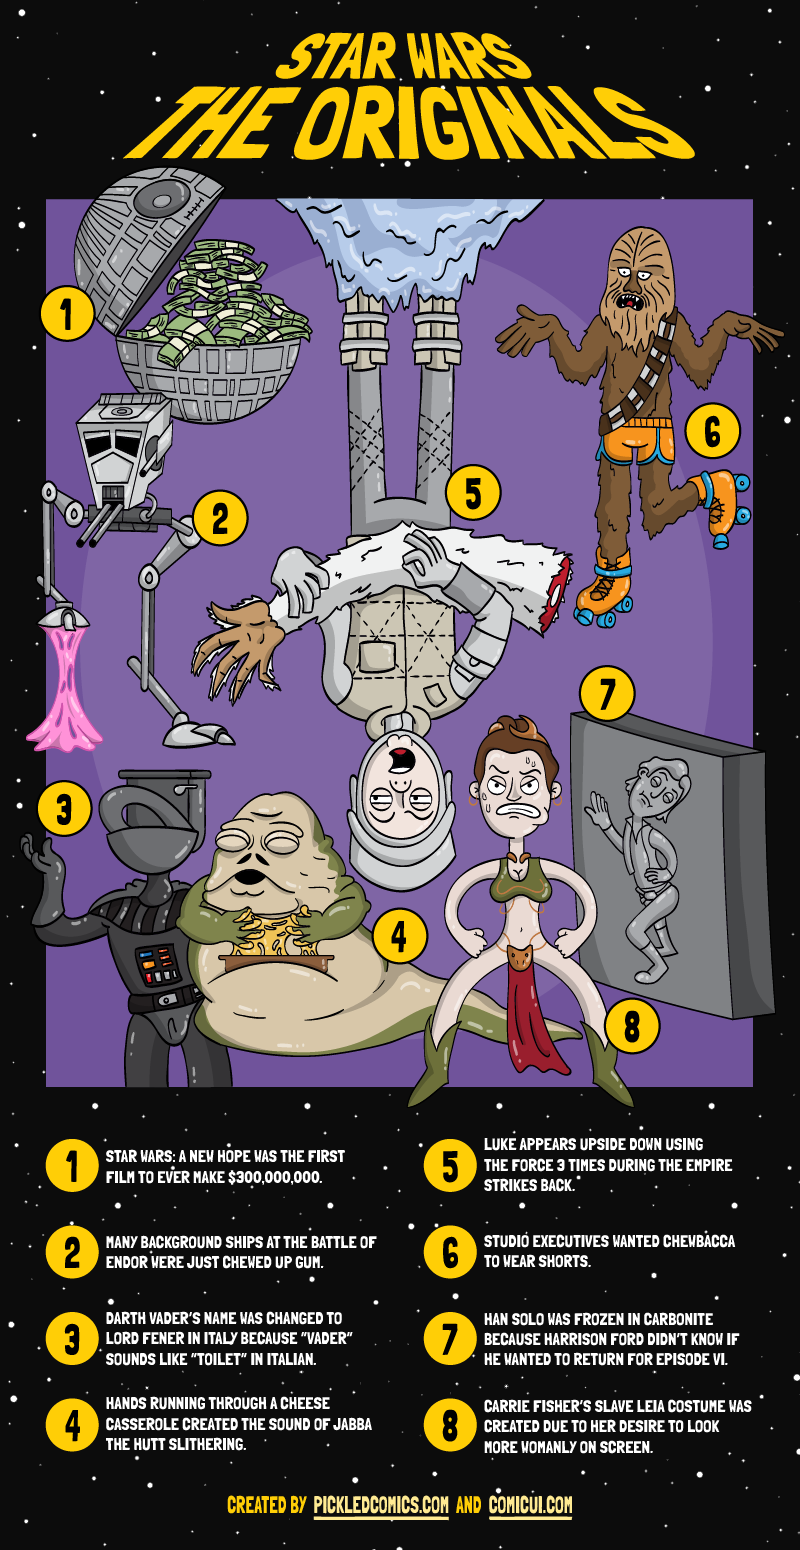 Star Wars The Originals. These Are The Star Wars Facts You're Looking For.